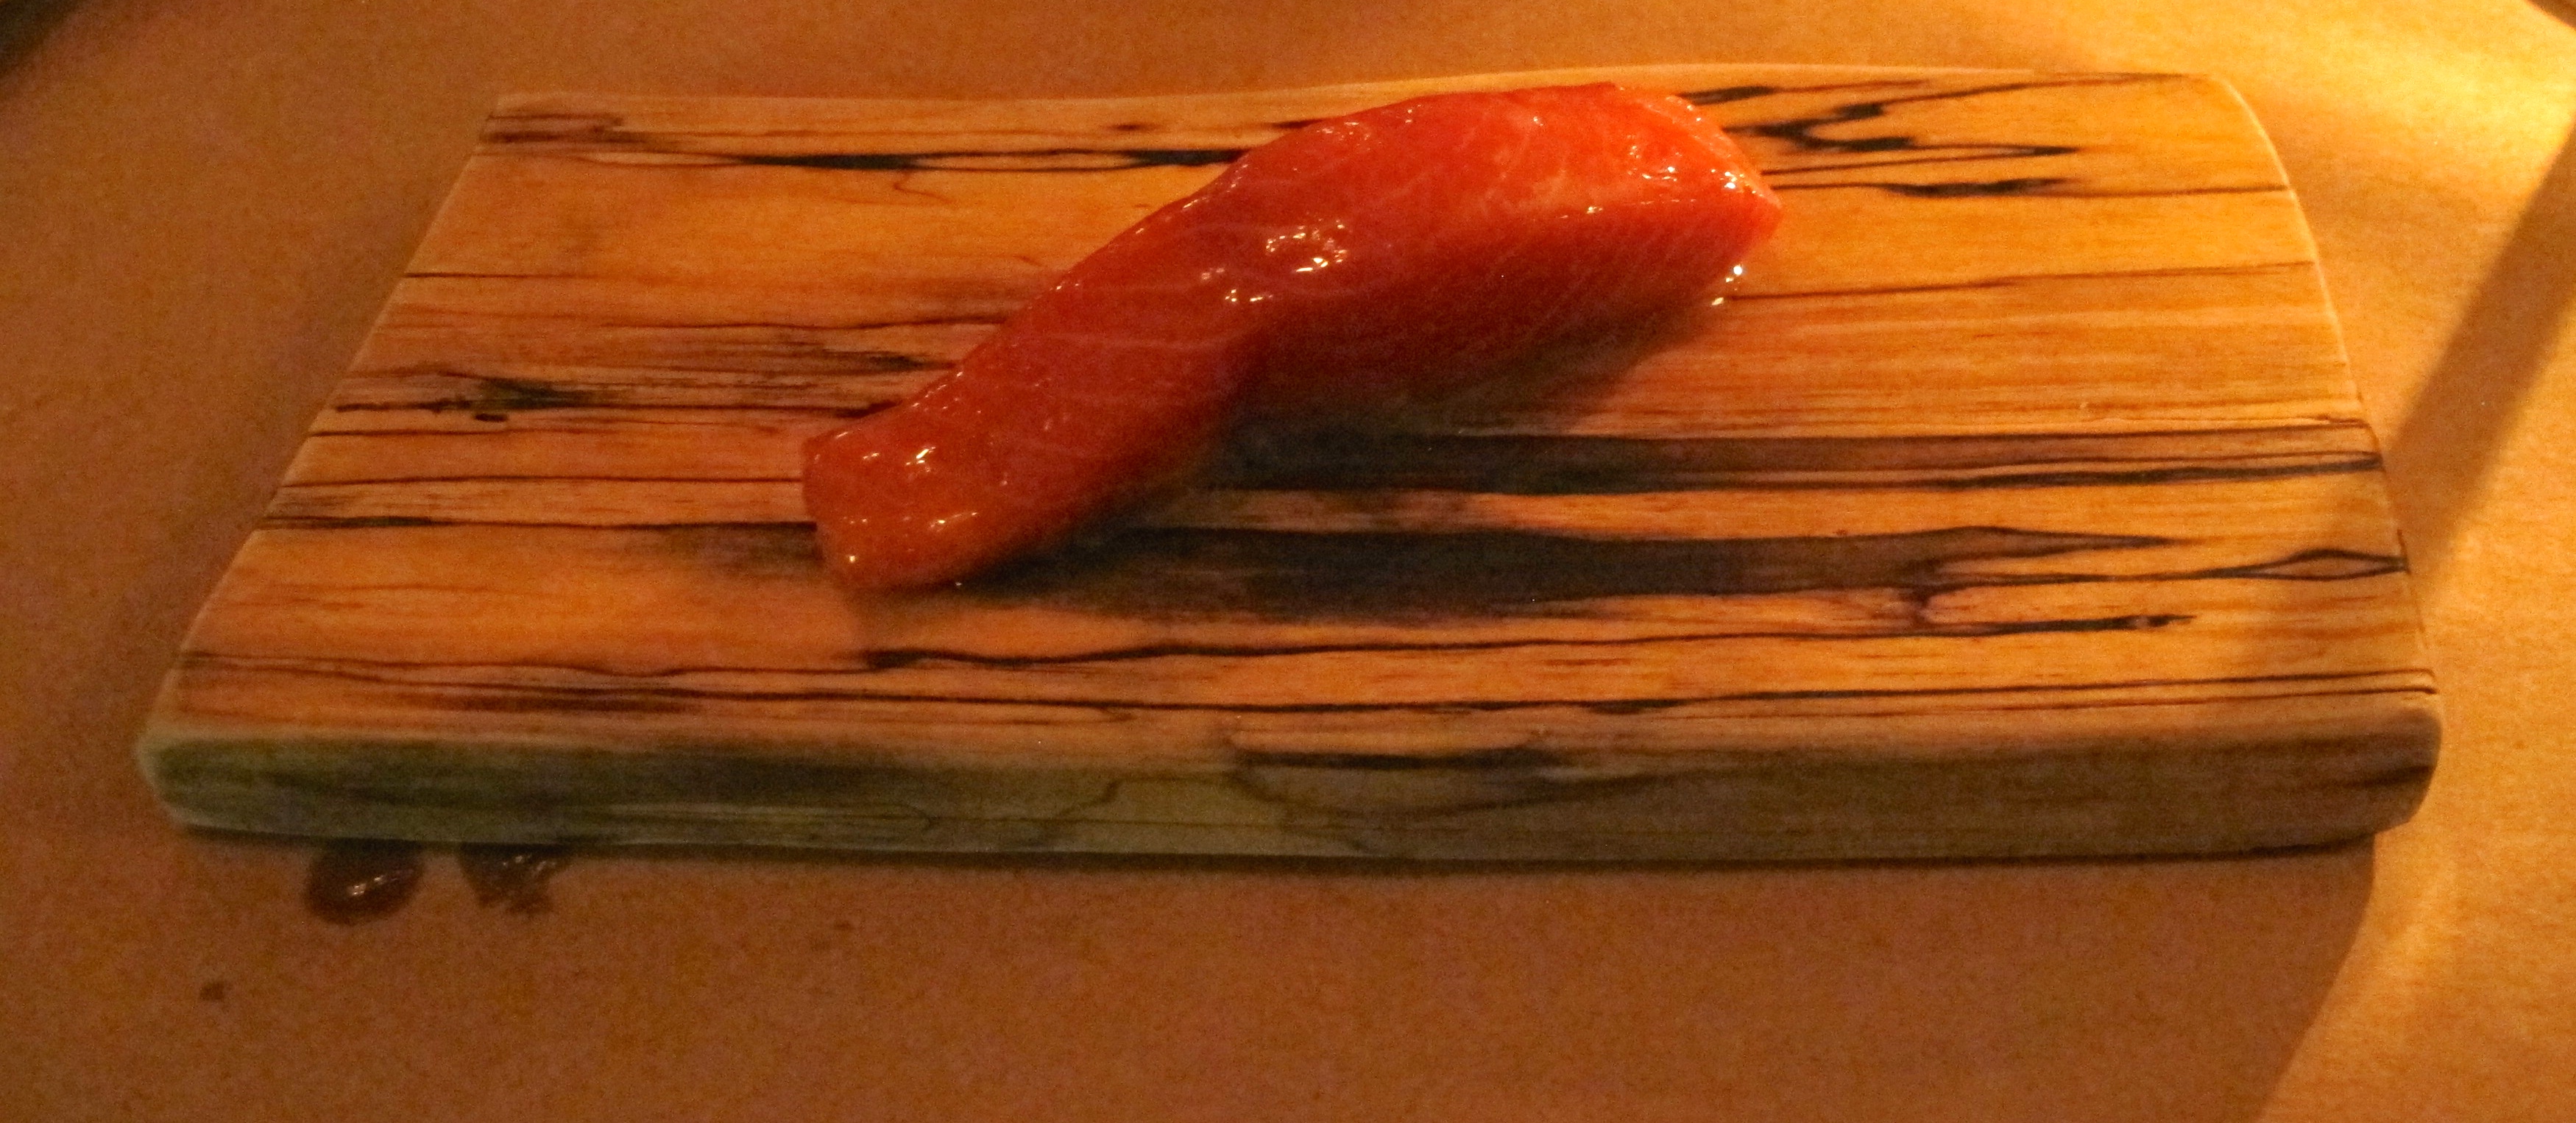 Sockeye Salmon smoked over green alder wood for 8 hours (and delivered straight from the smokehouse) is like Salmon candy - instantly addictive.